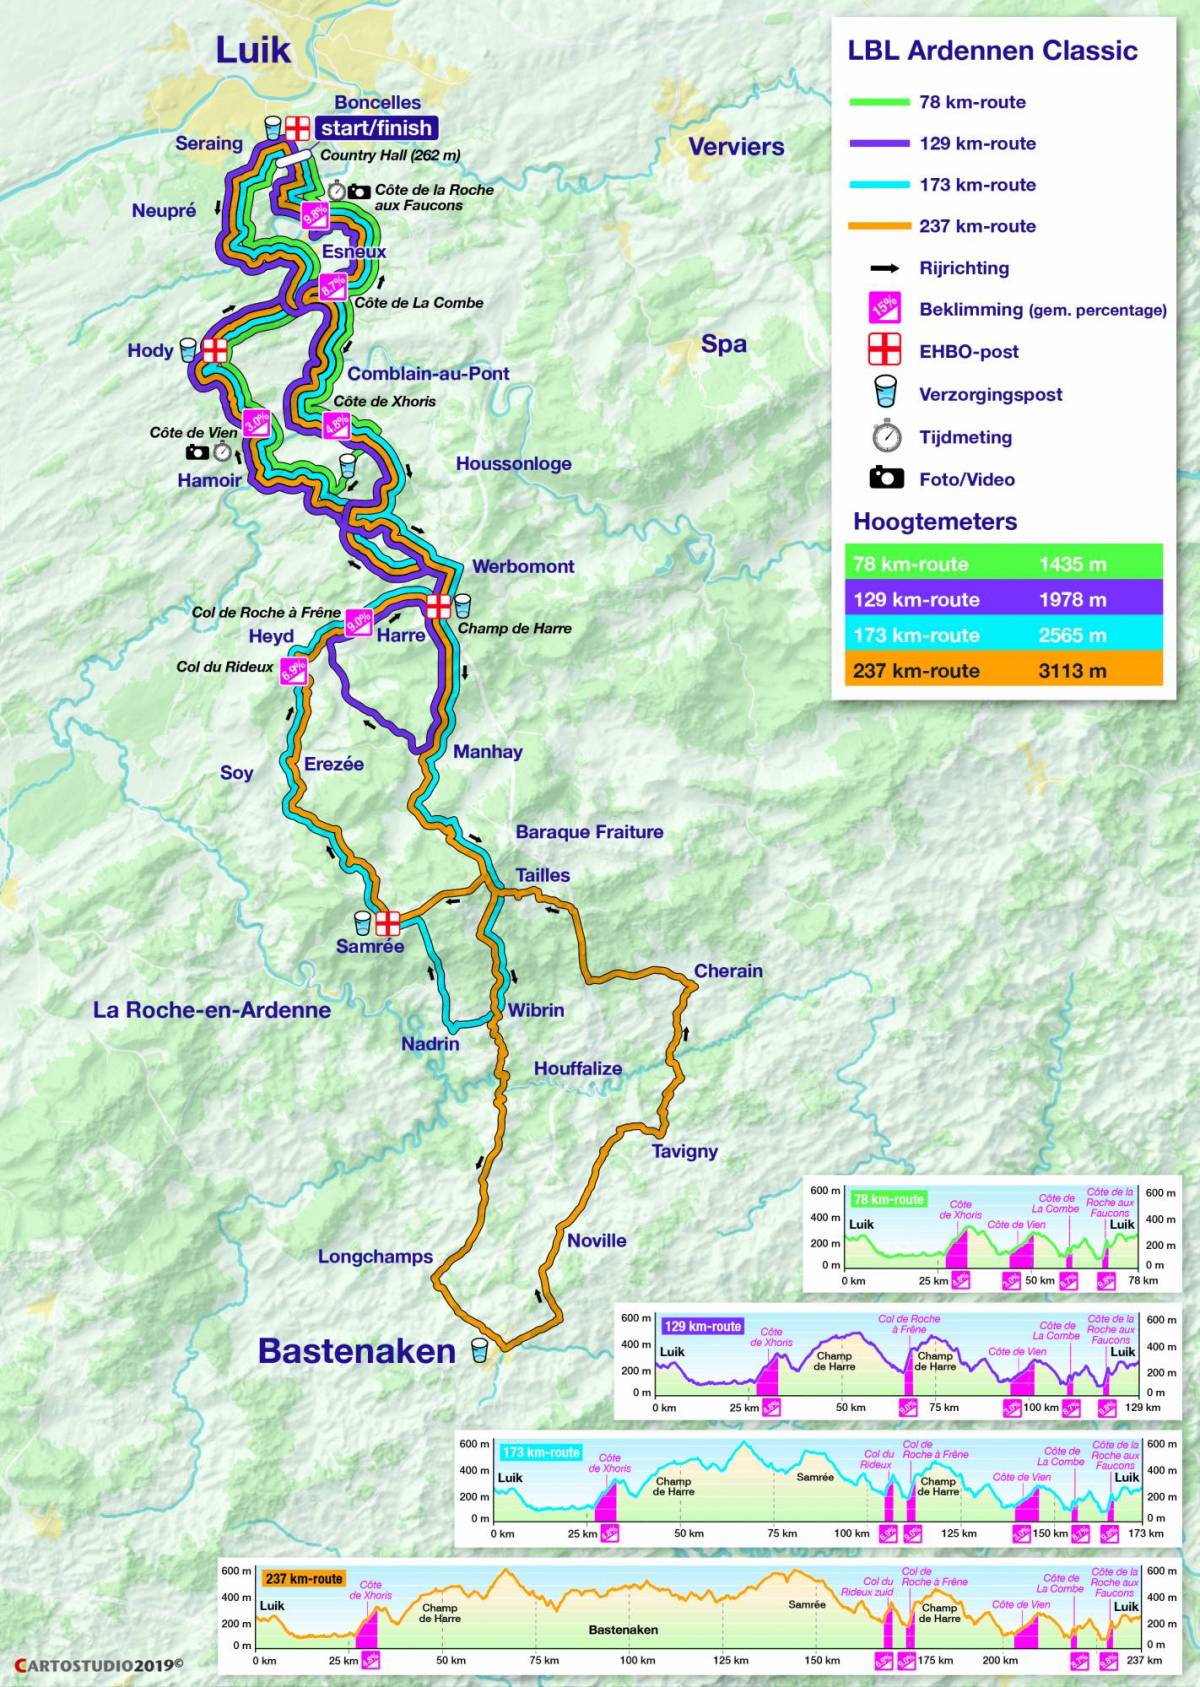 transfusie huurling fout Routes – LBL Ardennen Classic